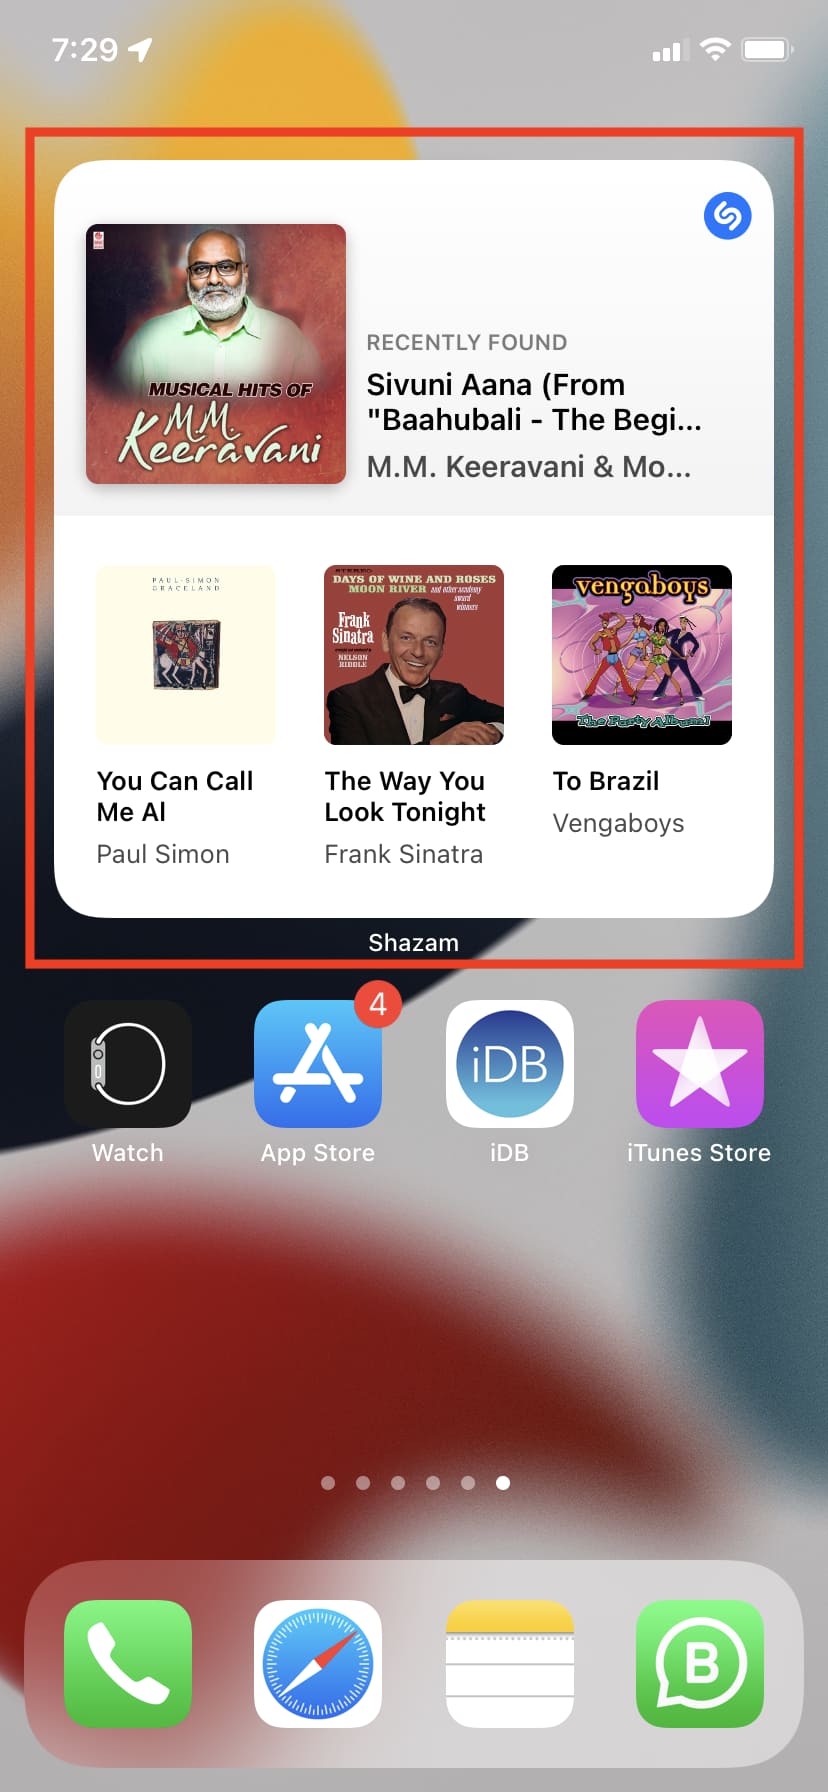 Shazam widget on iPhone Home Screen showing recently identified songs